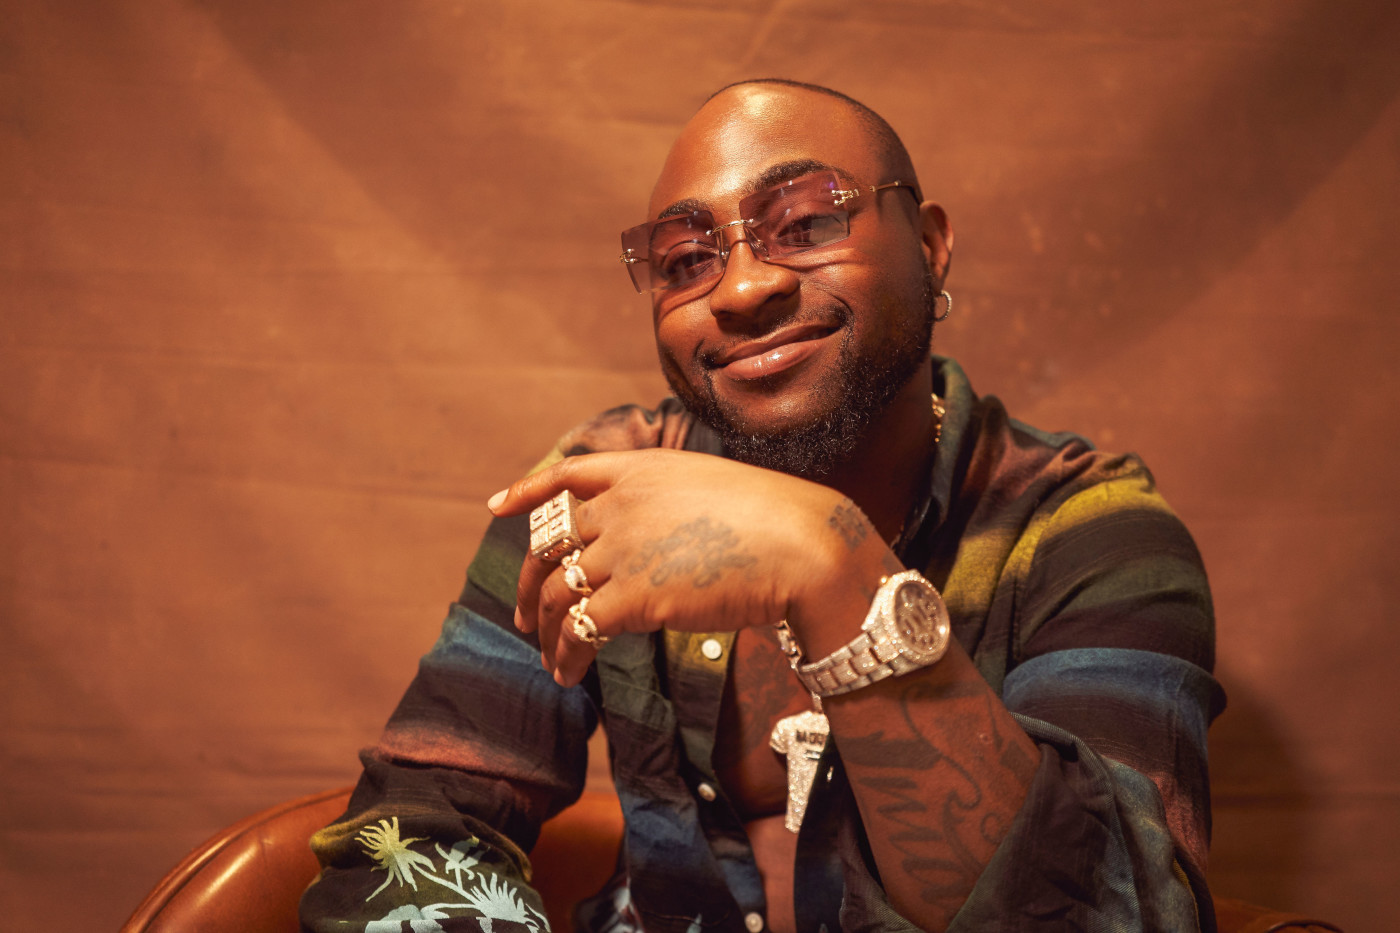 My Preferred Destination To Record Is Always Lagos”: A Chat With Davido | Complex